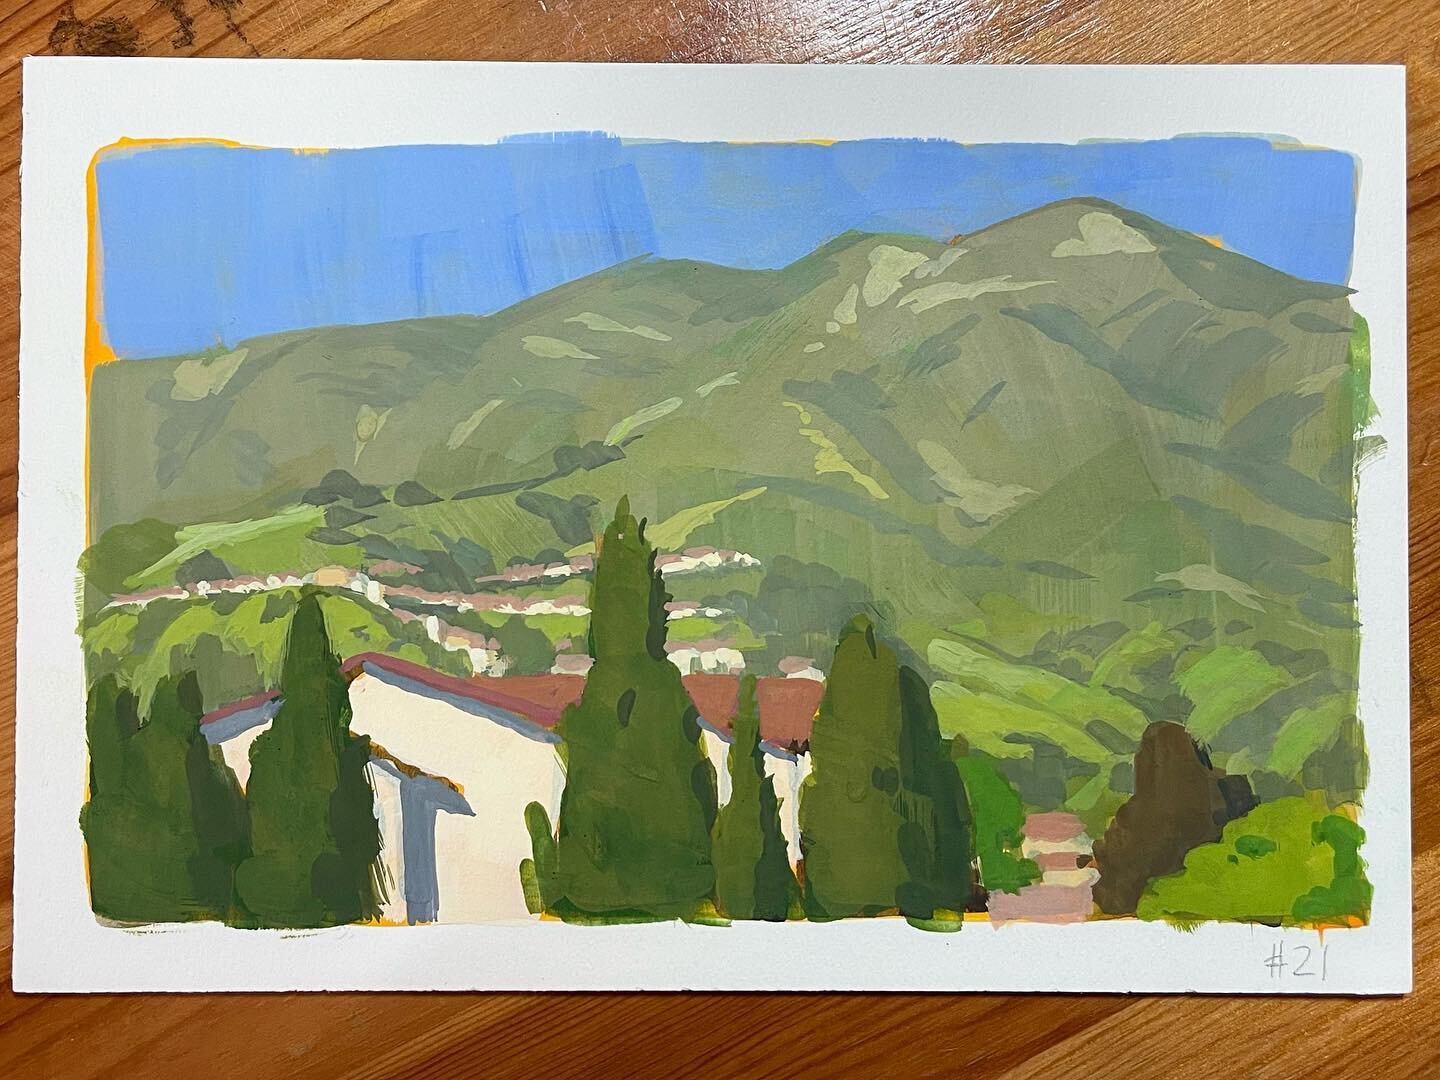 #pleinairpril day 21 Nice view of #burbank from the top of an empty parking structure. Bonus pic of my mobile setup and #strada easel, thanks to @warriorpainters #pleinair #painting #pleinairpainting #gouache #gouachepainting #painterofaight